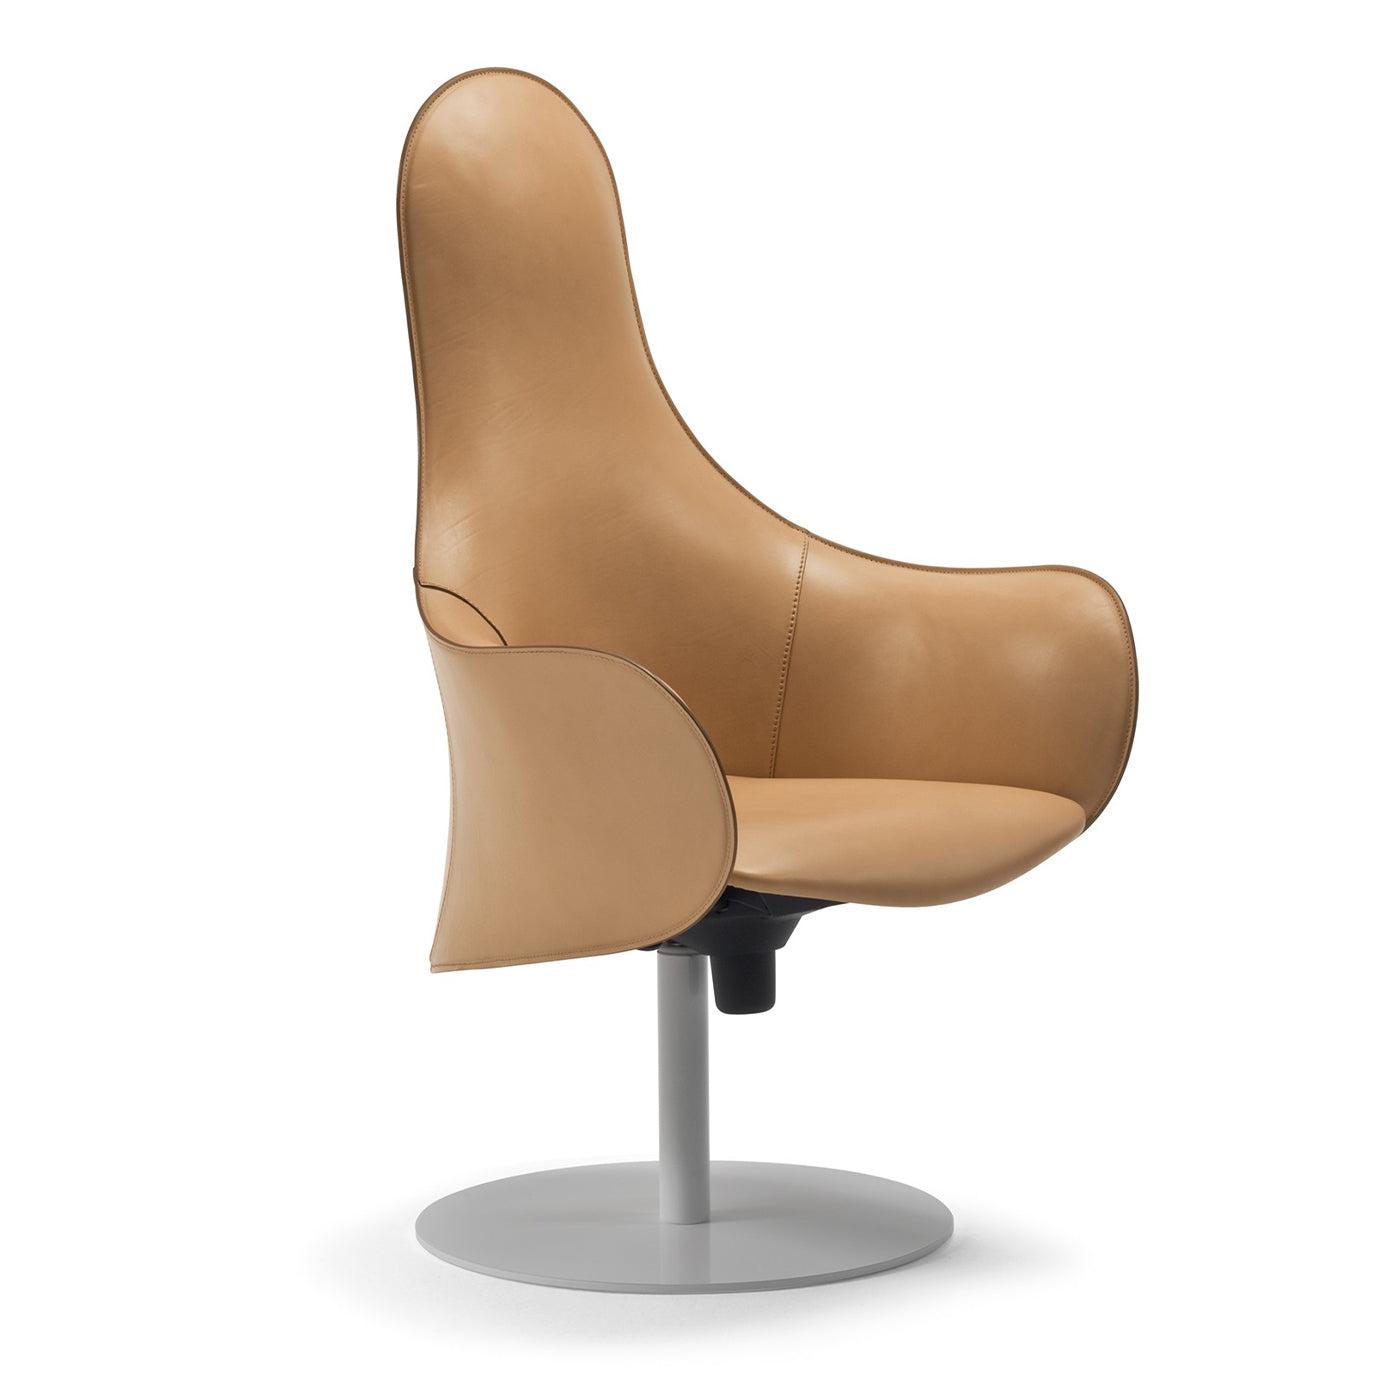 Hipod Fixed Base Chair by Giulio Manzoni - Alternative view 1